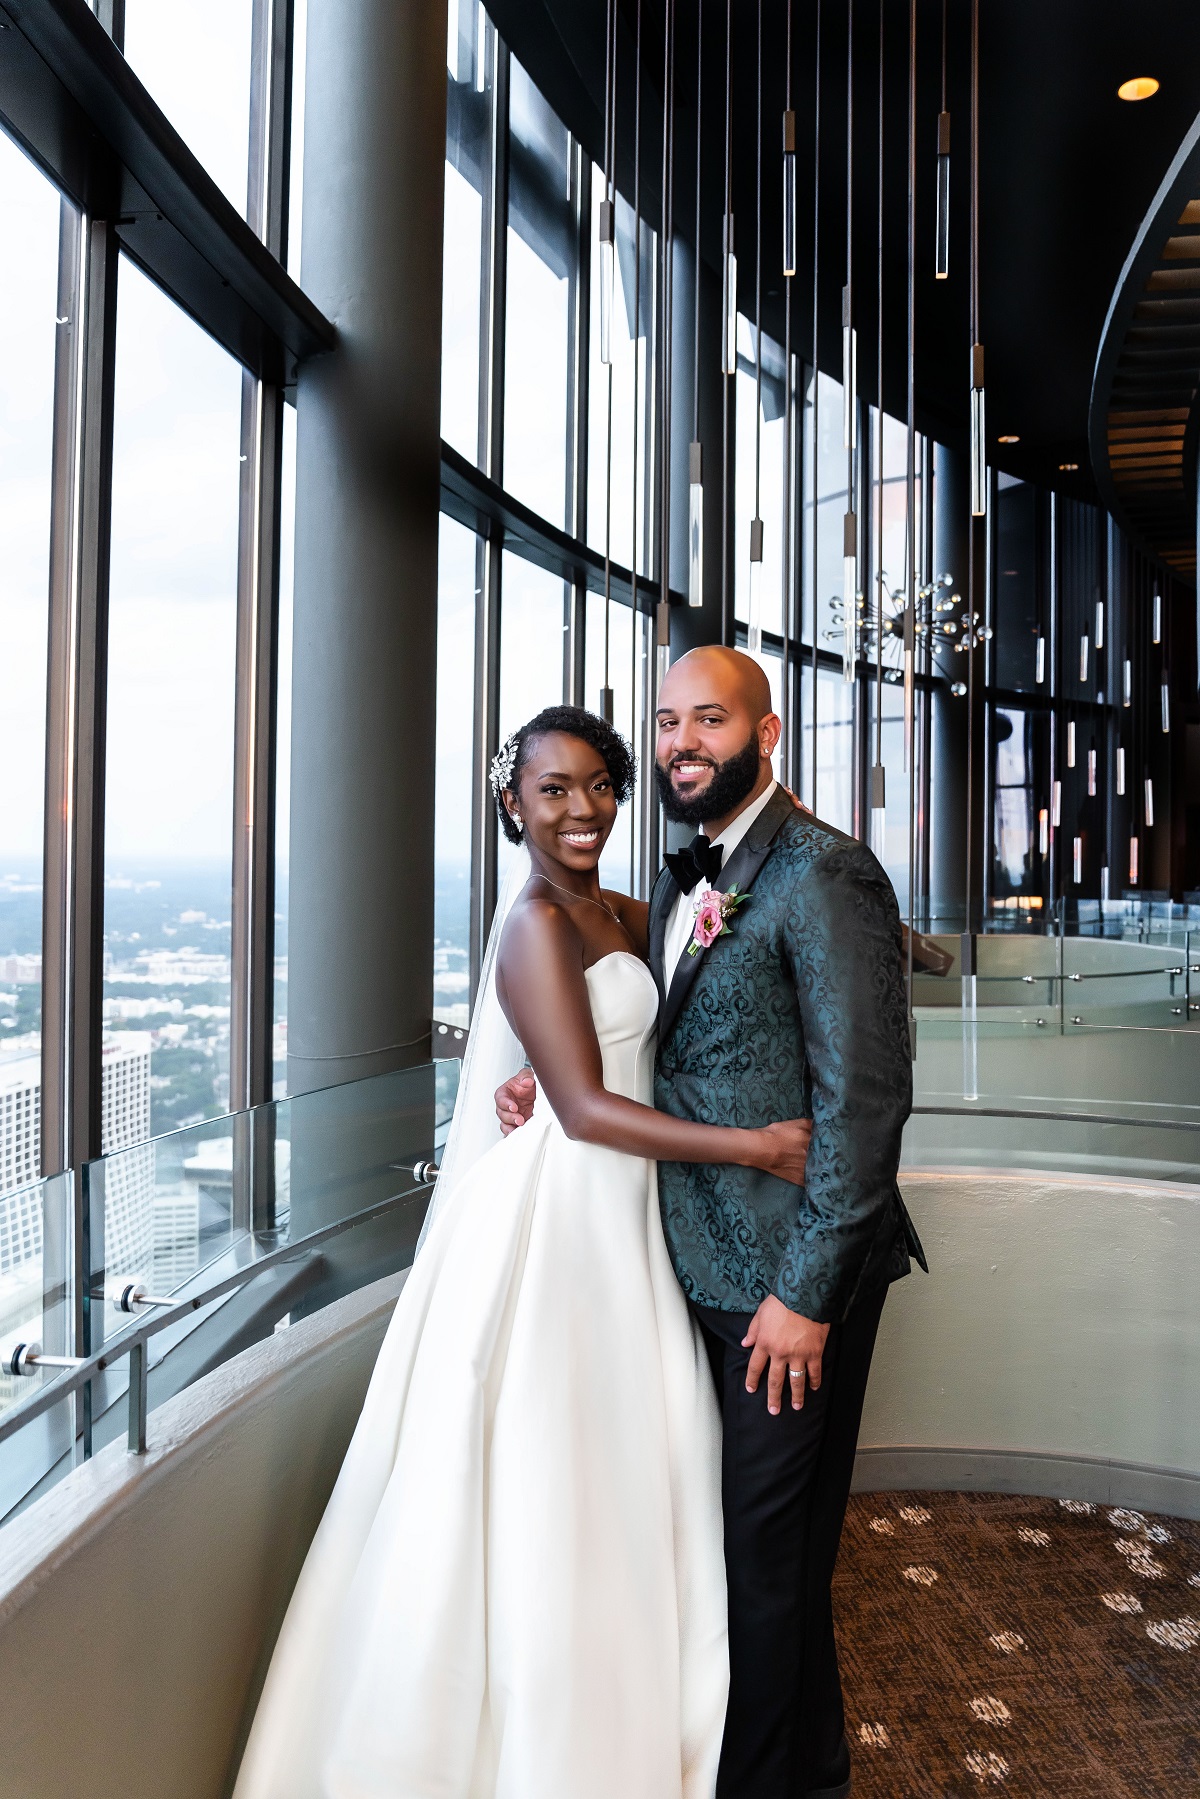 Briana Morris and Vincent Morales in their wedding photo on 'Married at First Sight'